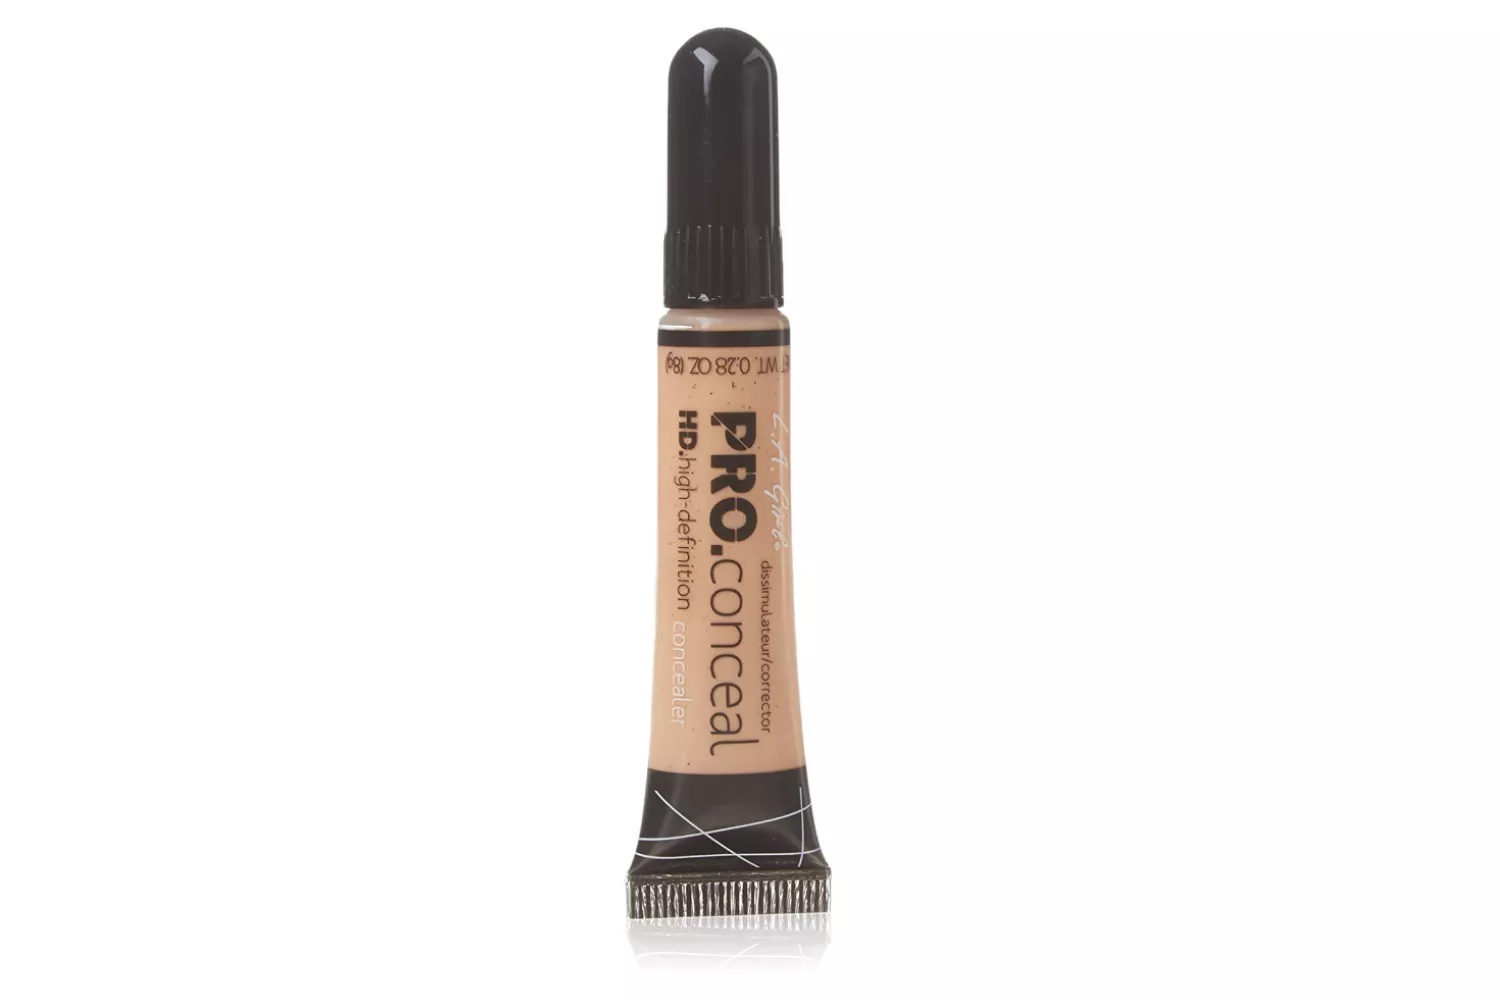 The Best Full-Coverage Concealers: L.A. Girl HD Pro Concealer